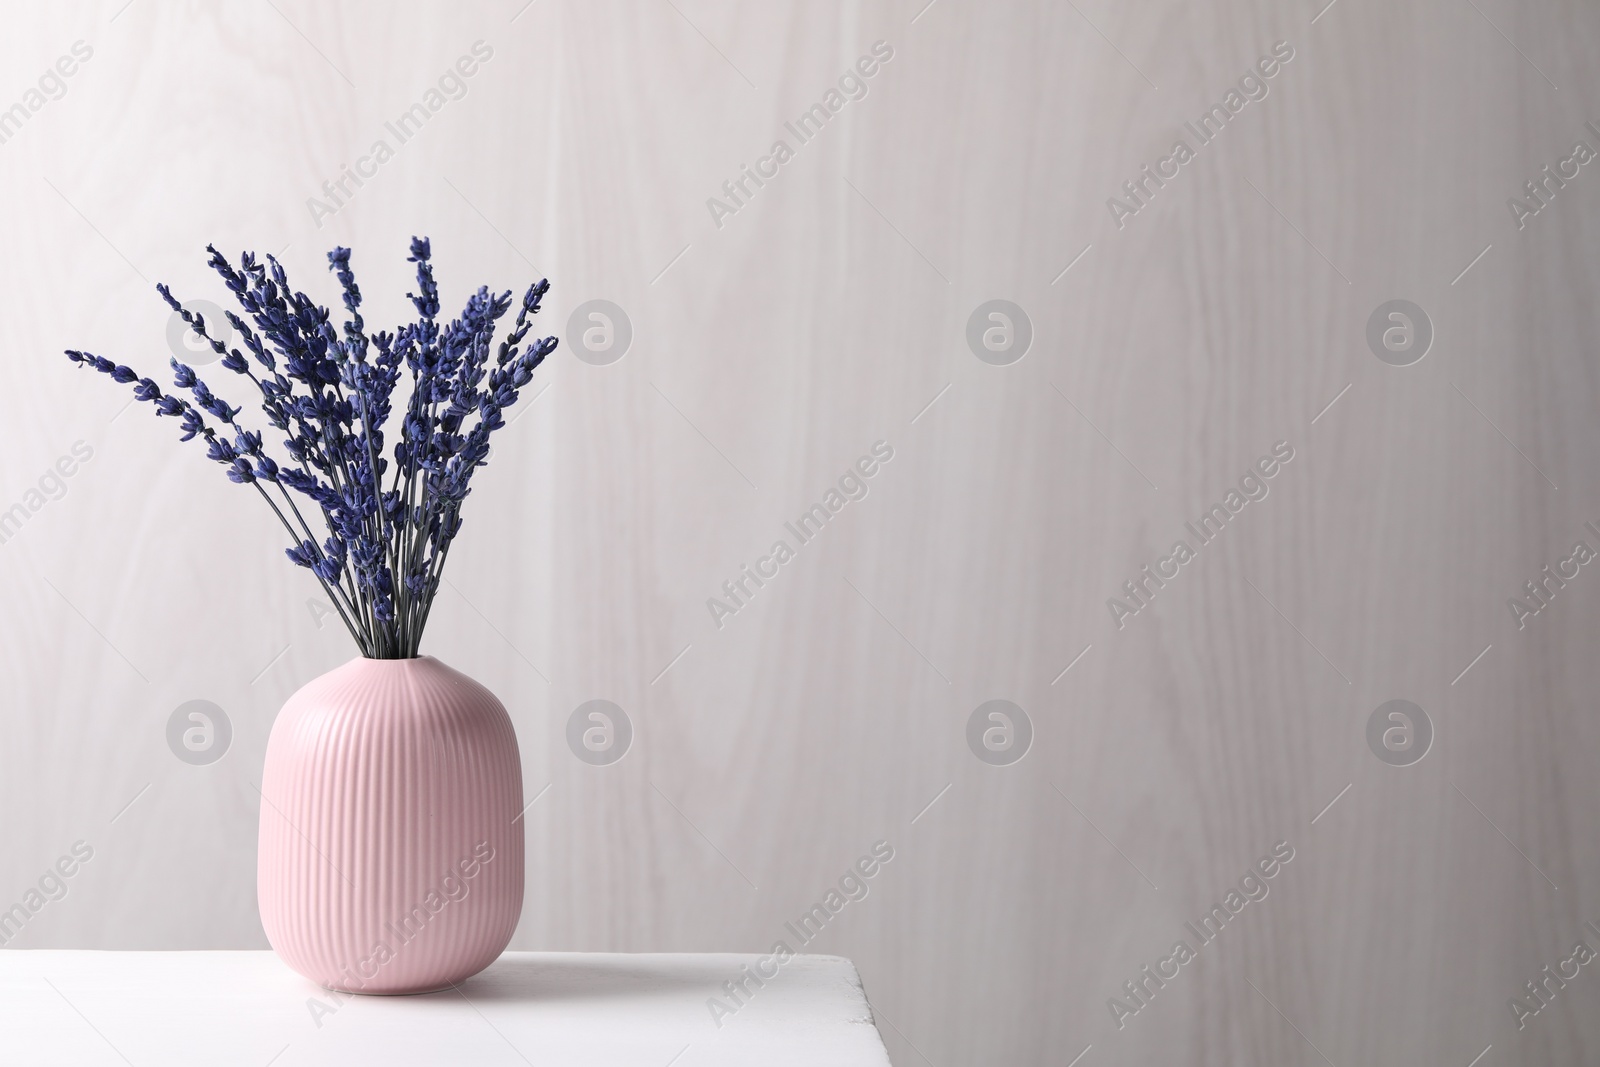 Photo of Bouquet of beautiful preserved lavender flowers on white table near grey wooden wall, space for text